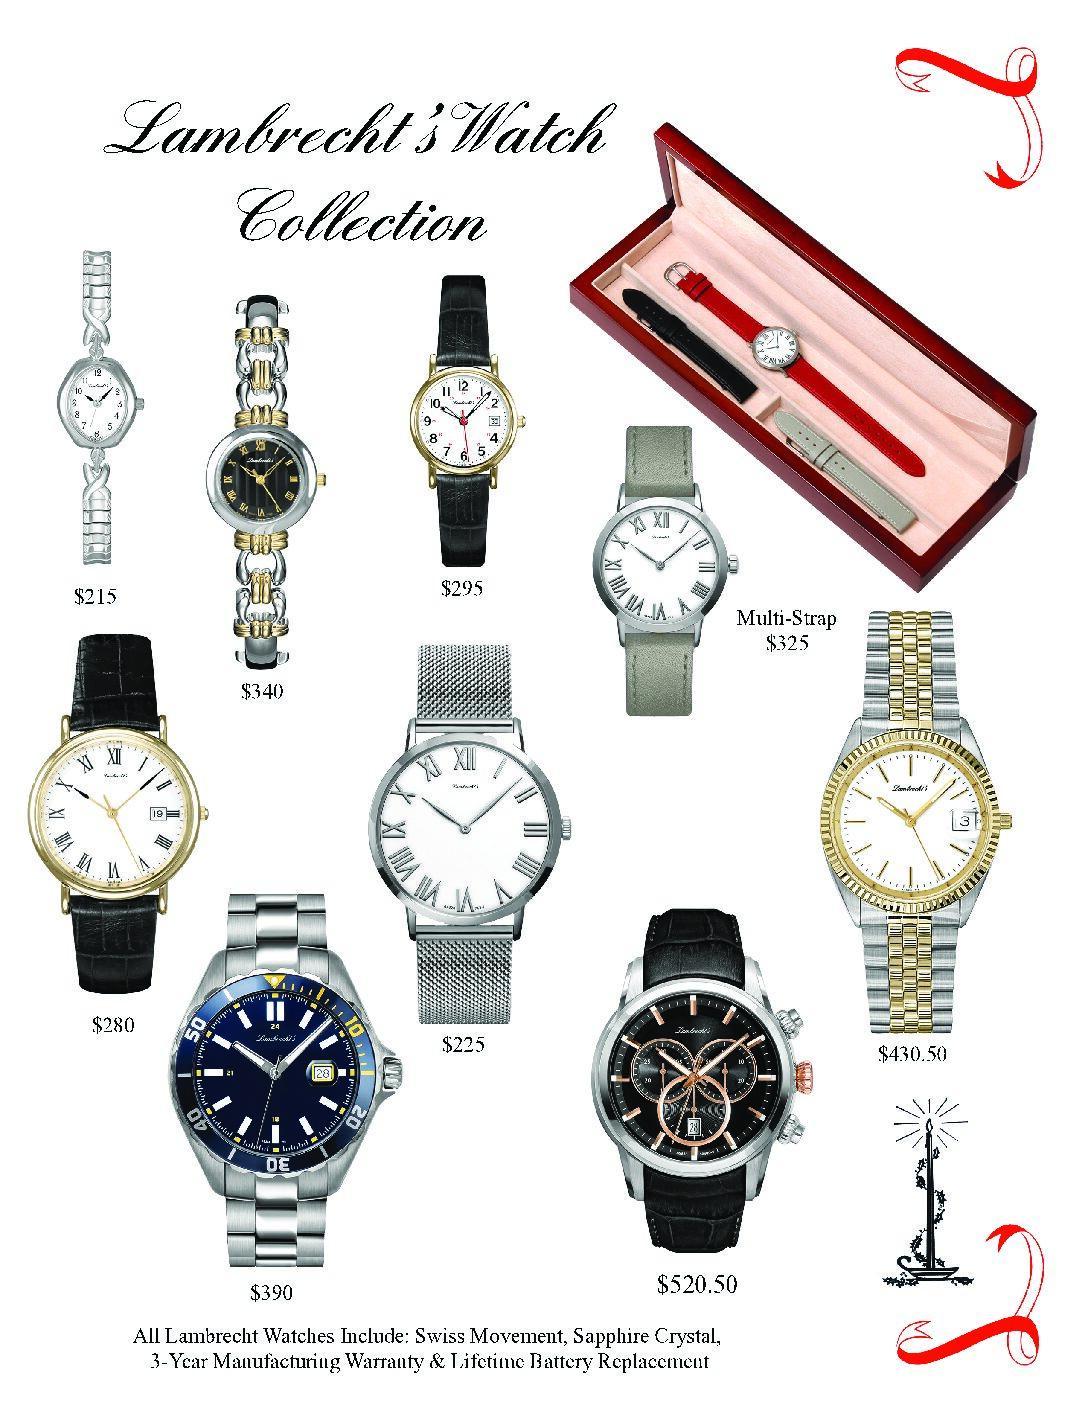 Lambrecht's Watch Collection Gift Guide